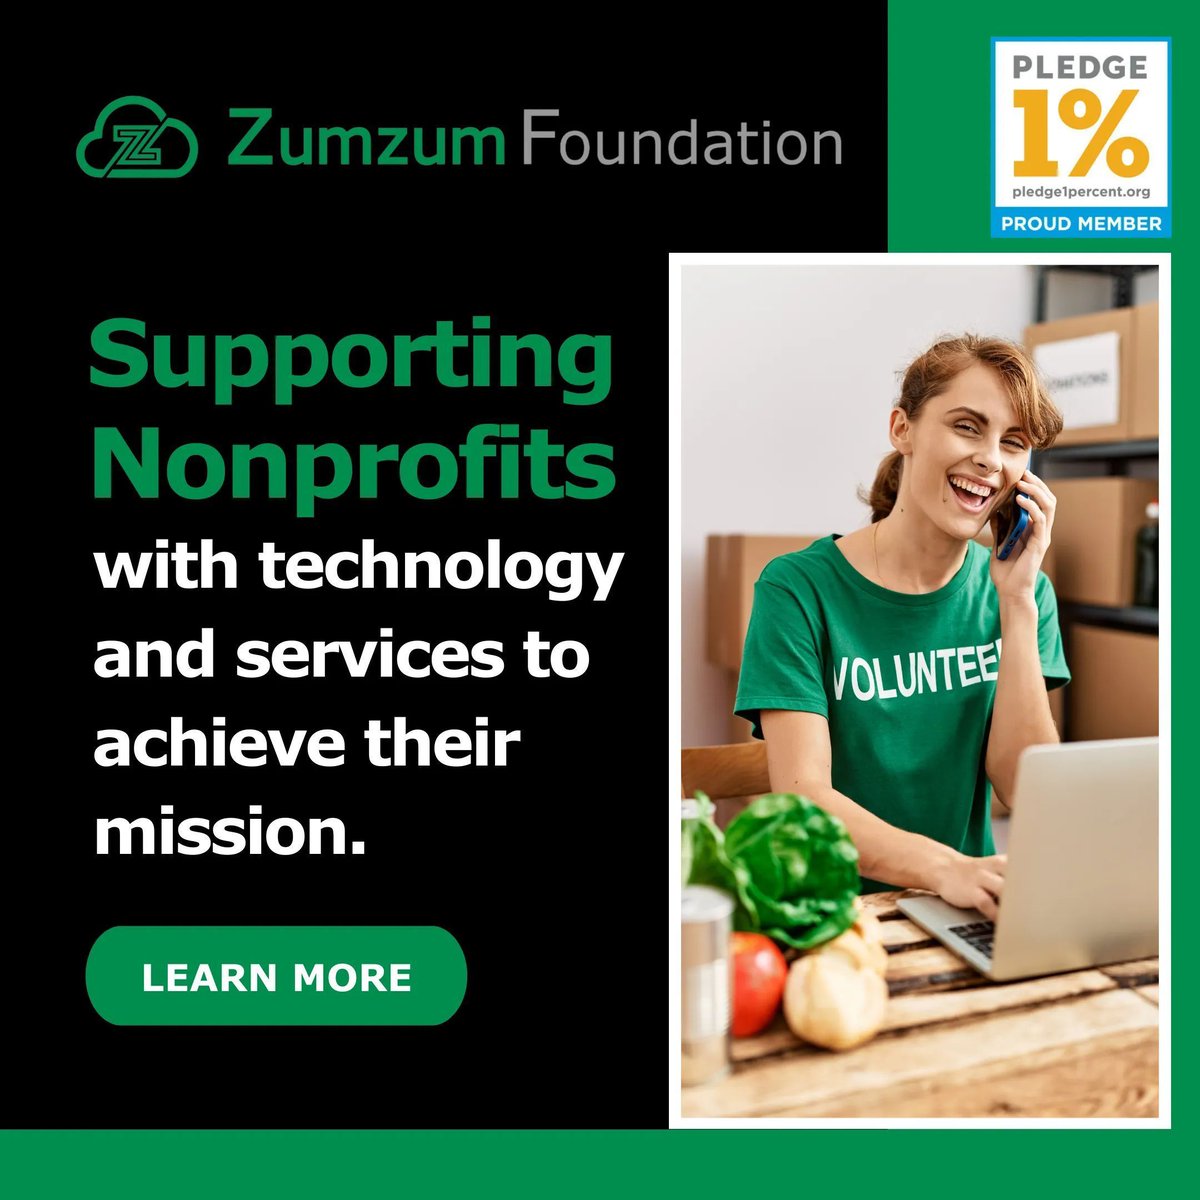 Zumzum is a member of #Pledge1, a global movement that inspires, educates, and empowers every entrepreneur, company, and employee to be a force for good. Zumzum is proud to support nonprofits with technology and services to achieve their mission. 

buff.ly/3NBFy6x